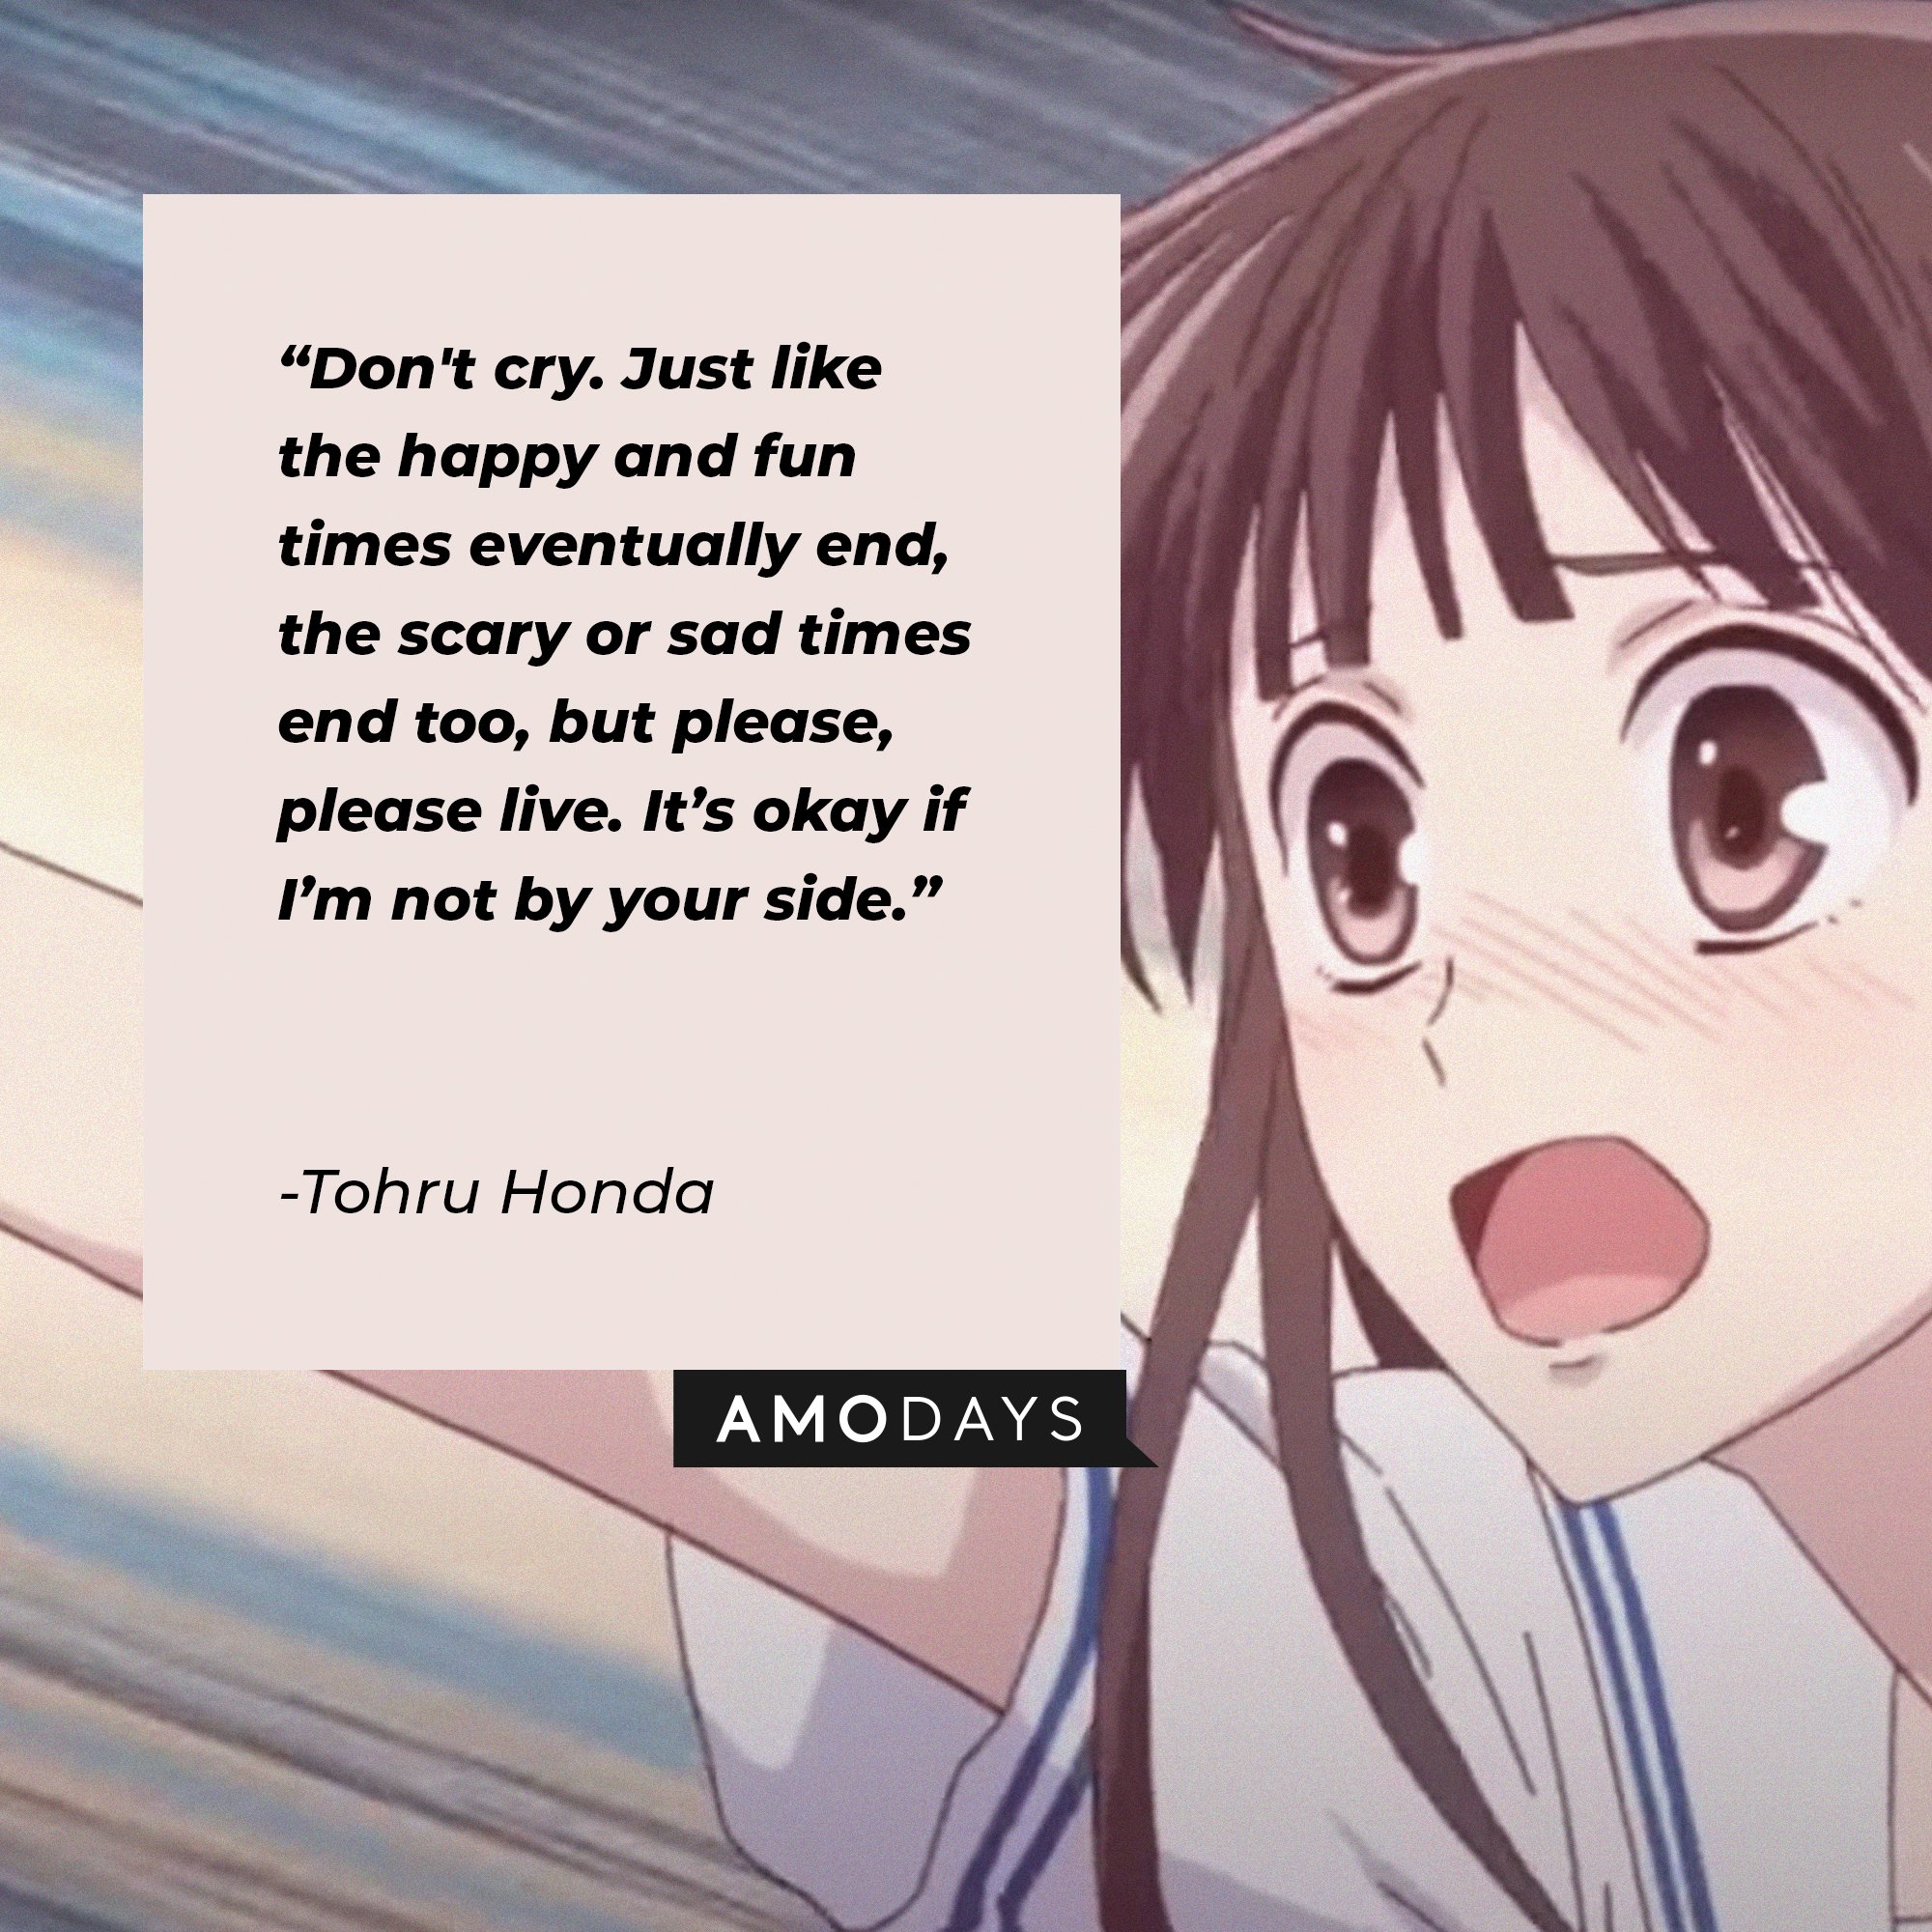  Tohru Honda’s quote: “Don't cry. Just like the happy and fun times eventually end, the scary or sad times end too, but please, please live. It’s okay if I’m not by your side.” | Image: AmoDays